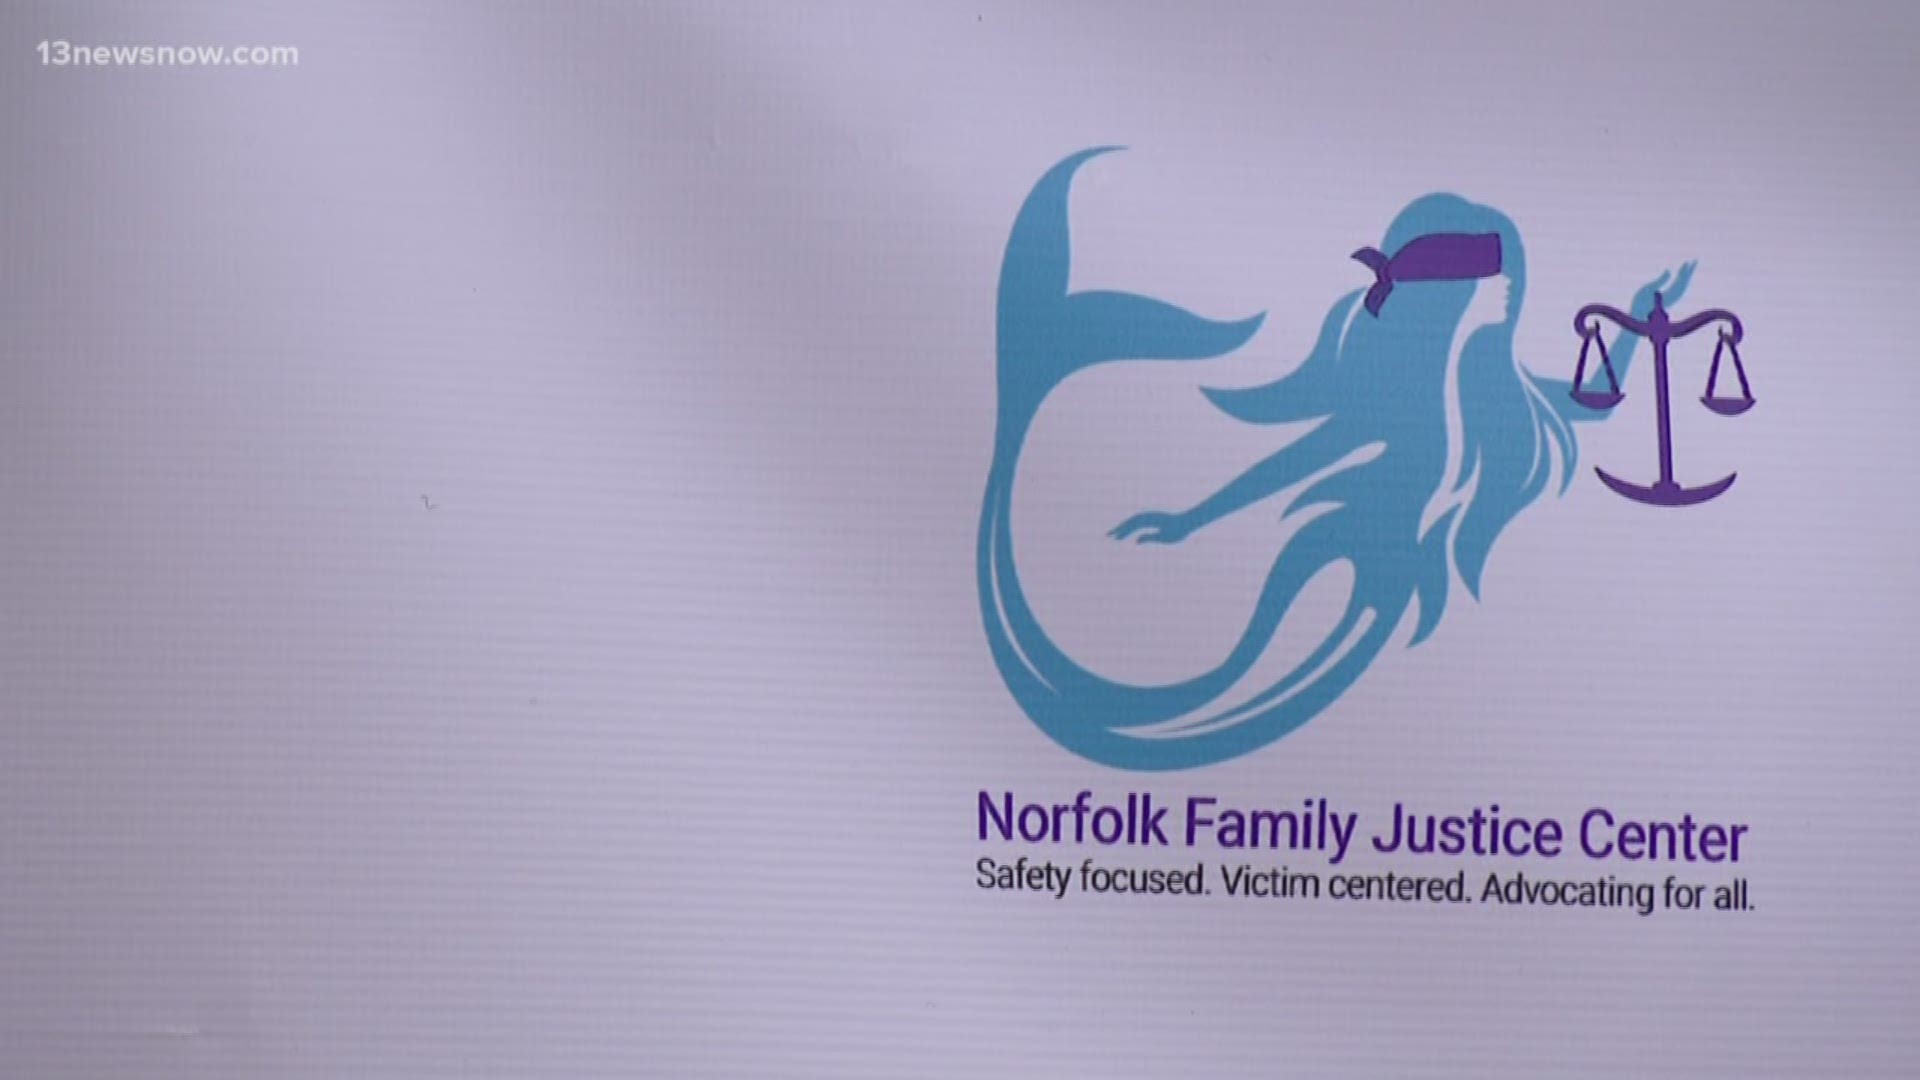 The Family Justice Center provides all the resources victims may need. Domestic and sexual assault victims can make one stop instead of navigating different systems.